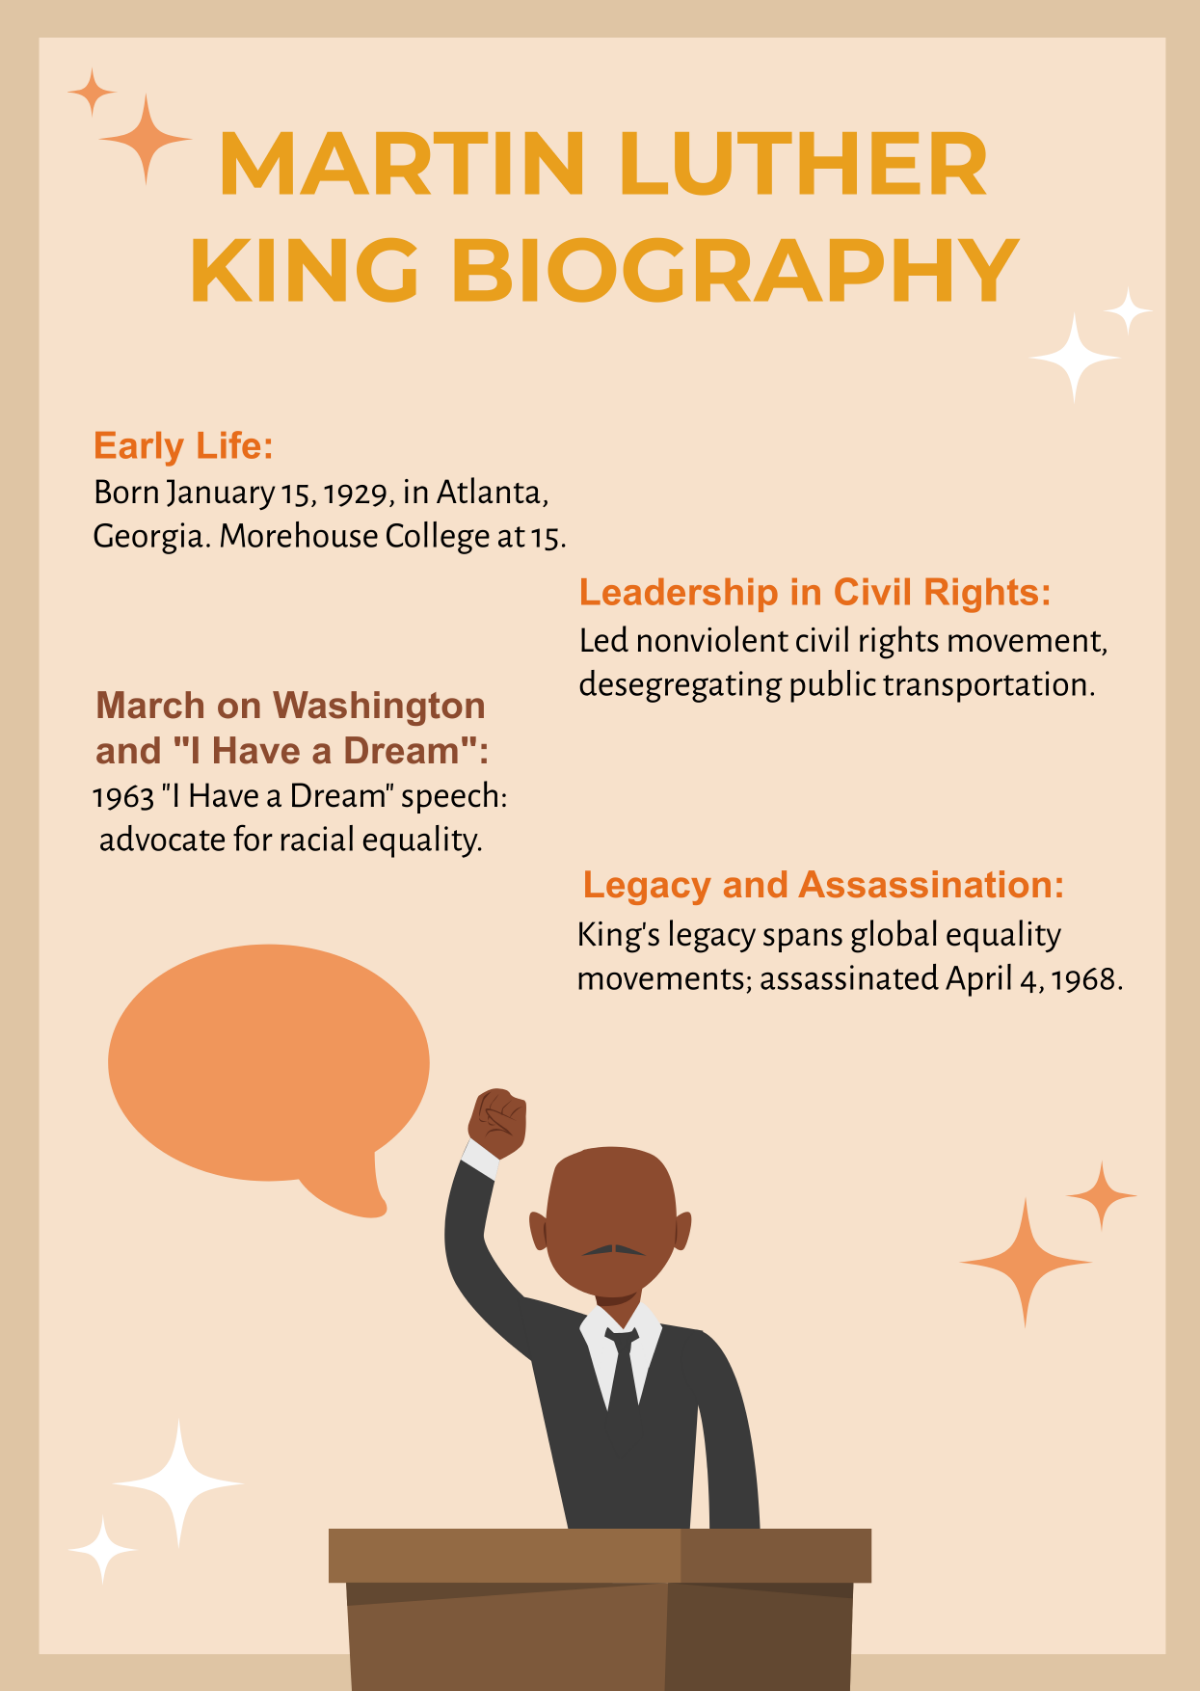 Martin Luther King Biography for Students Template